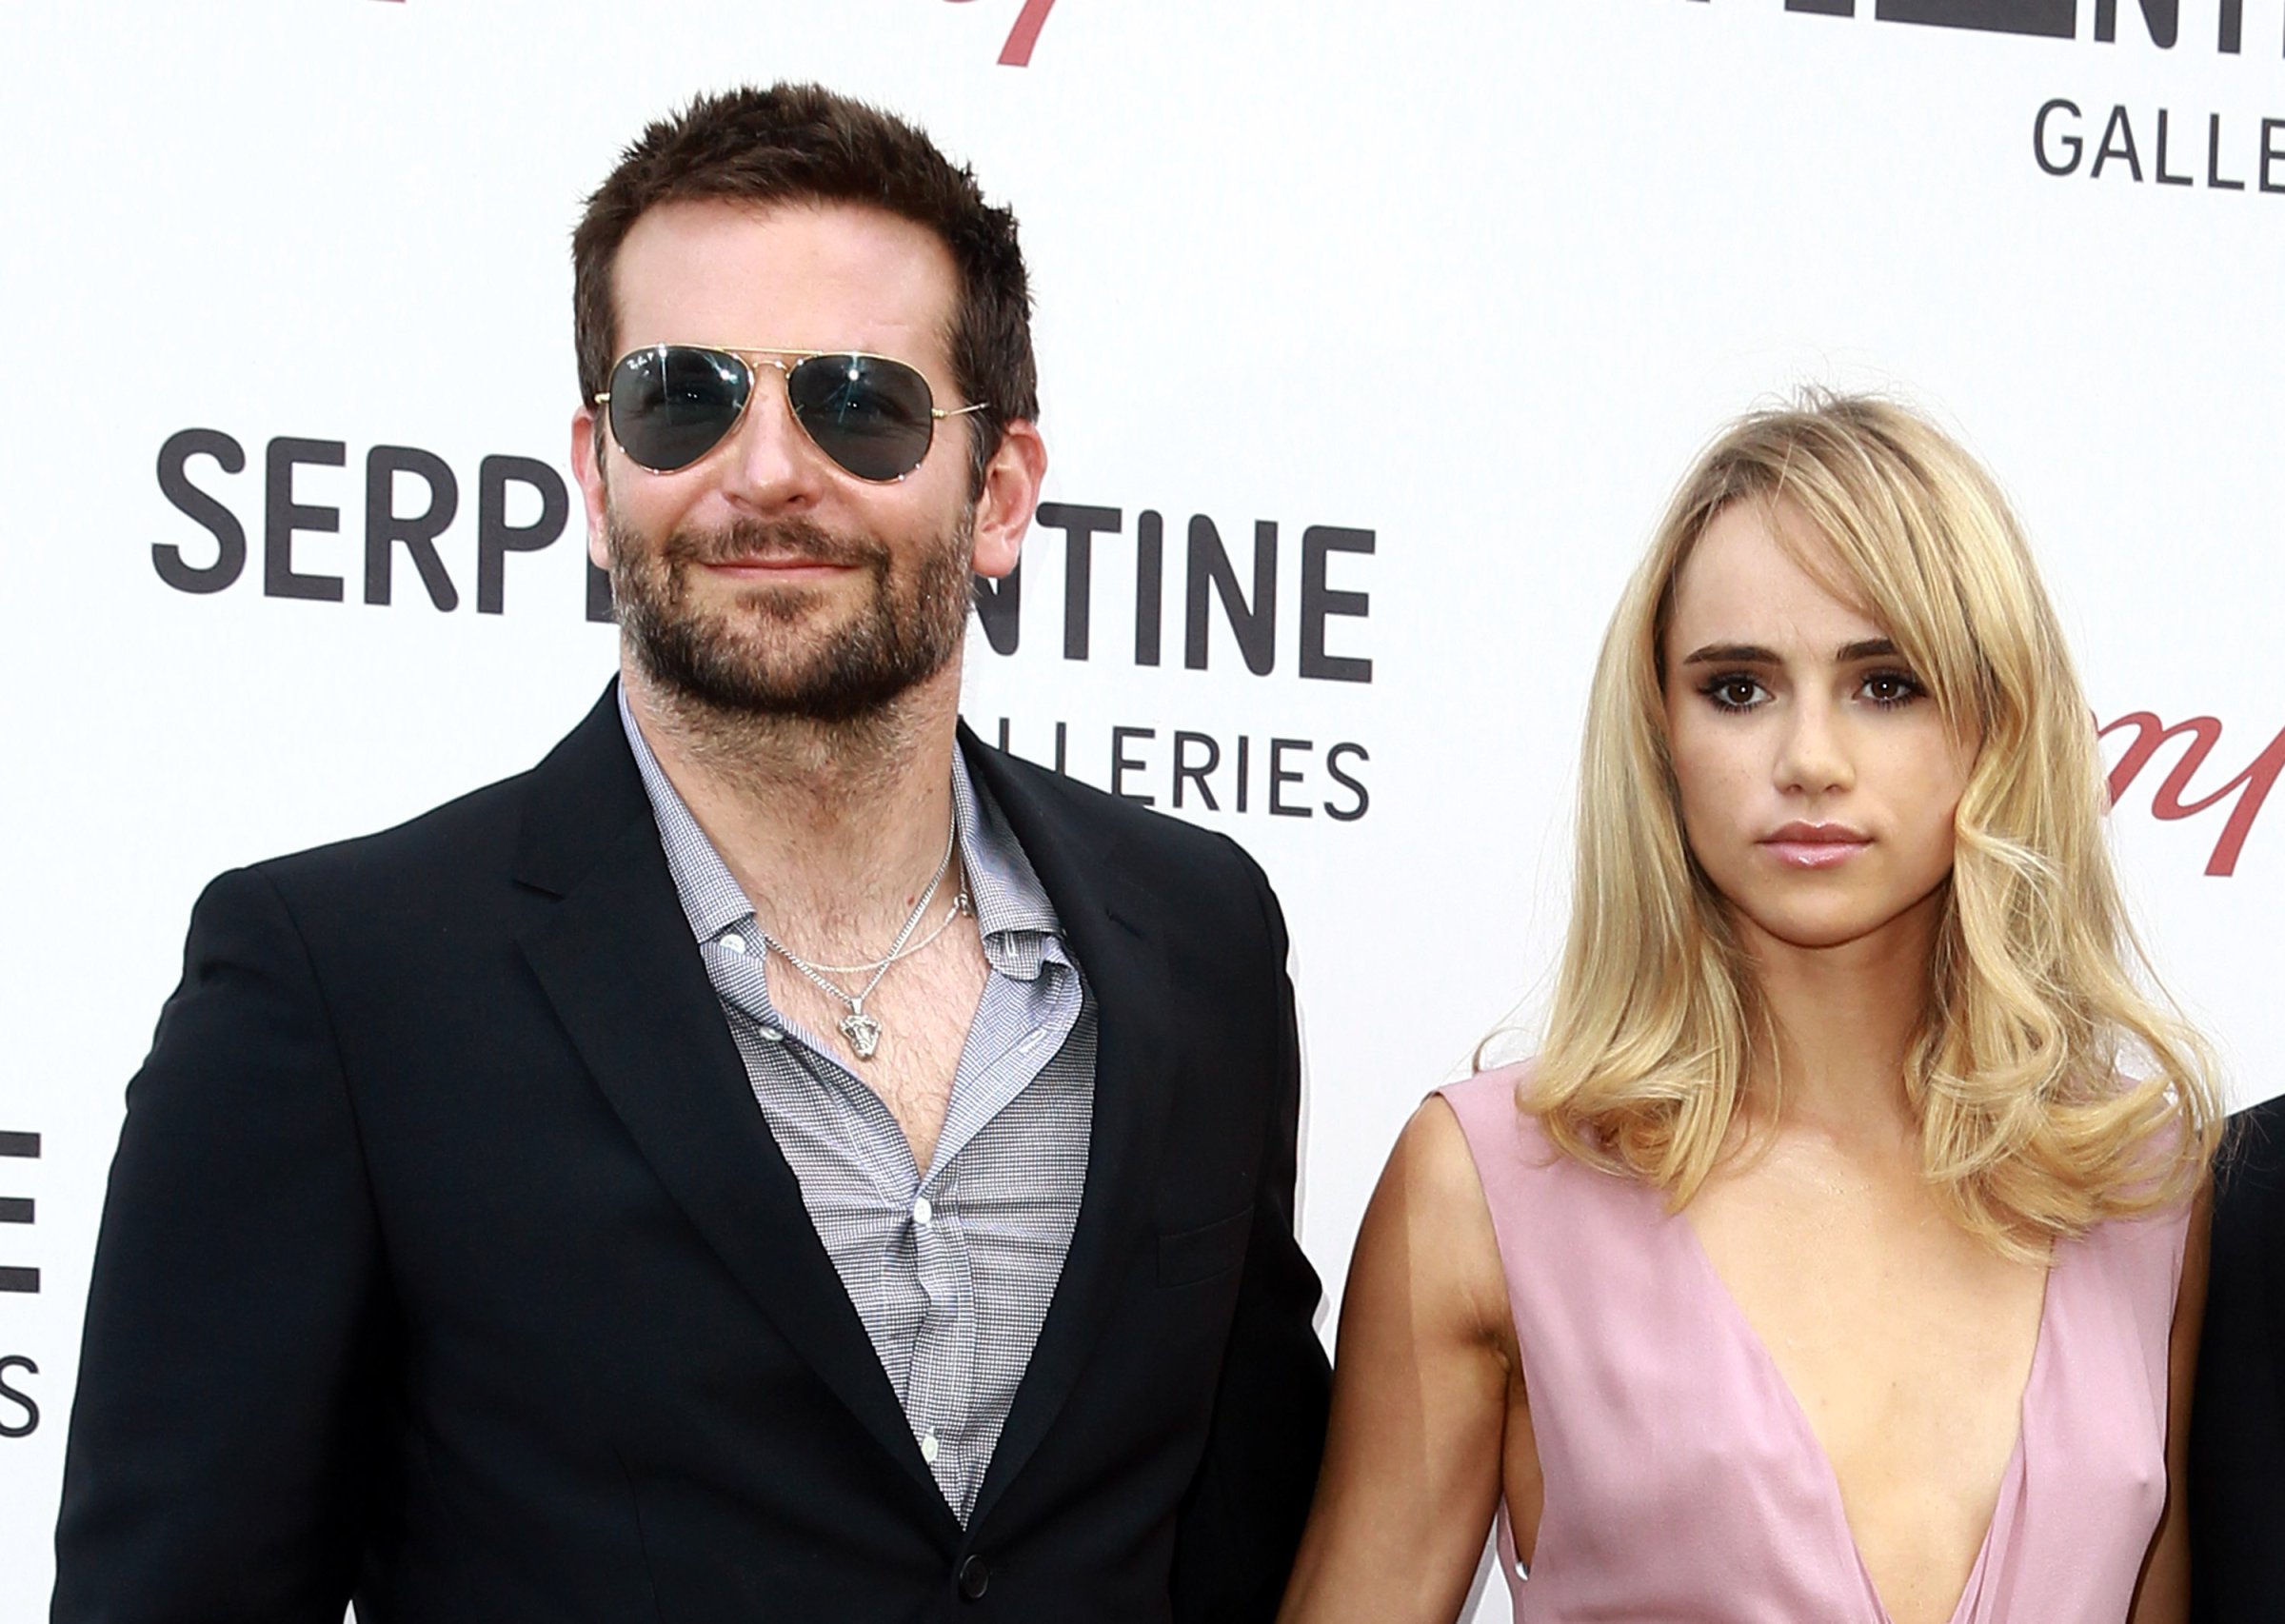 Bradley Cooper and Suki Waterhouse summer party on July 1, 2014 in London, England.